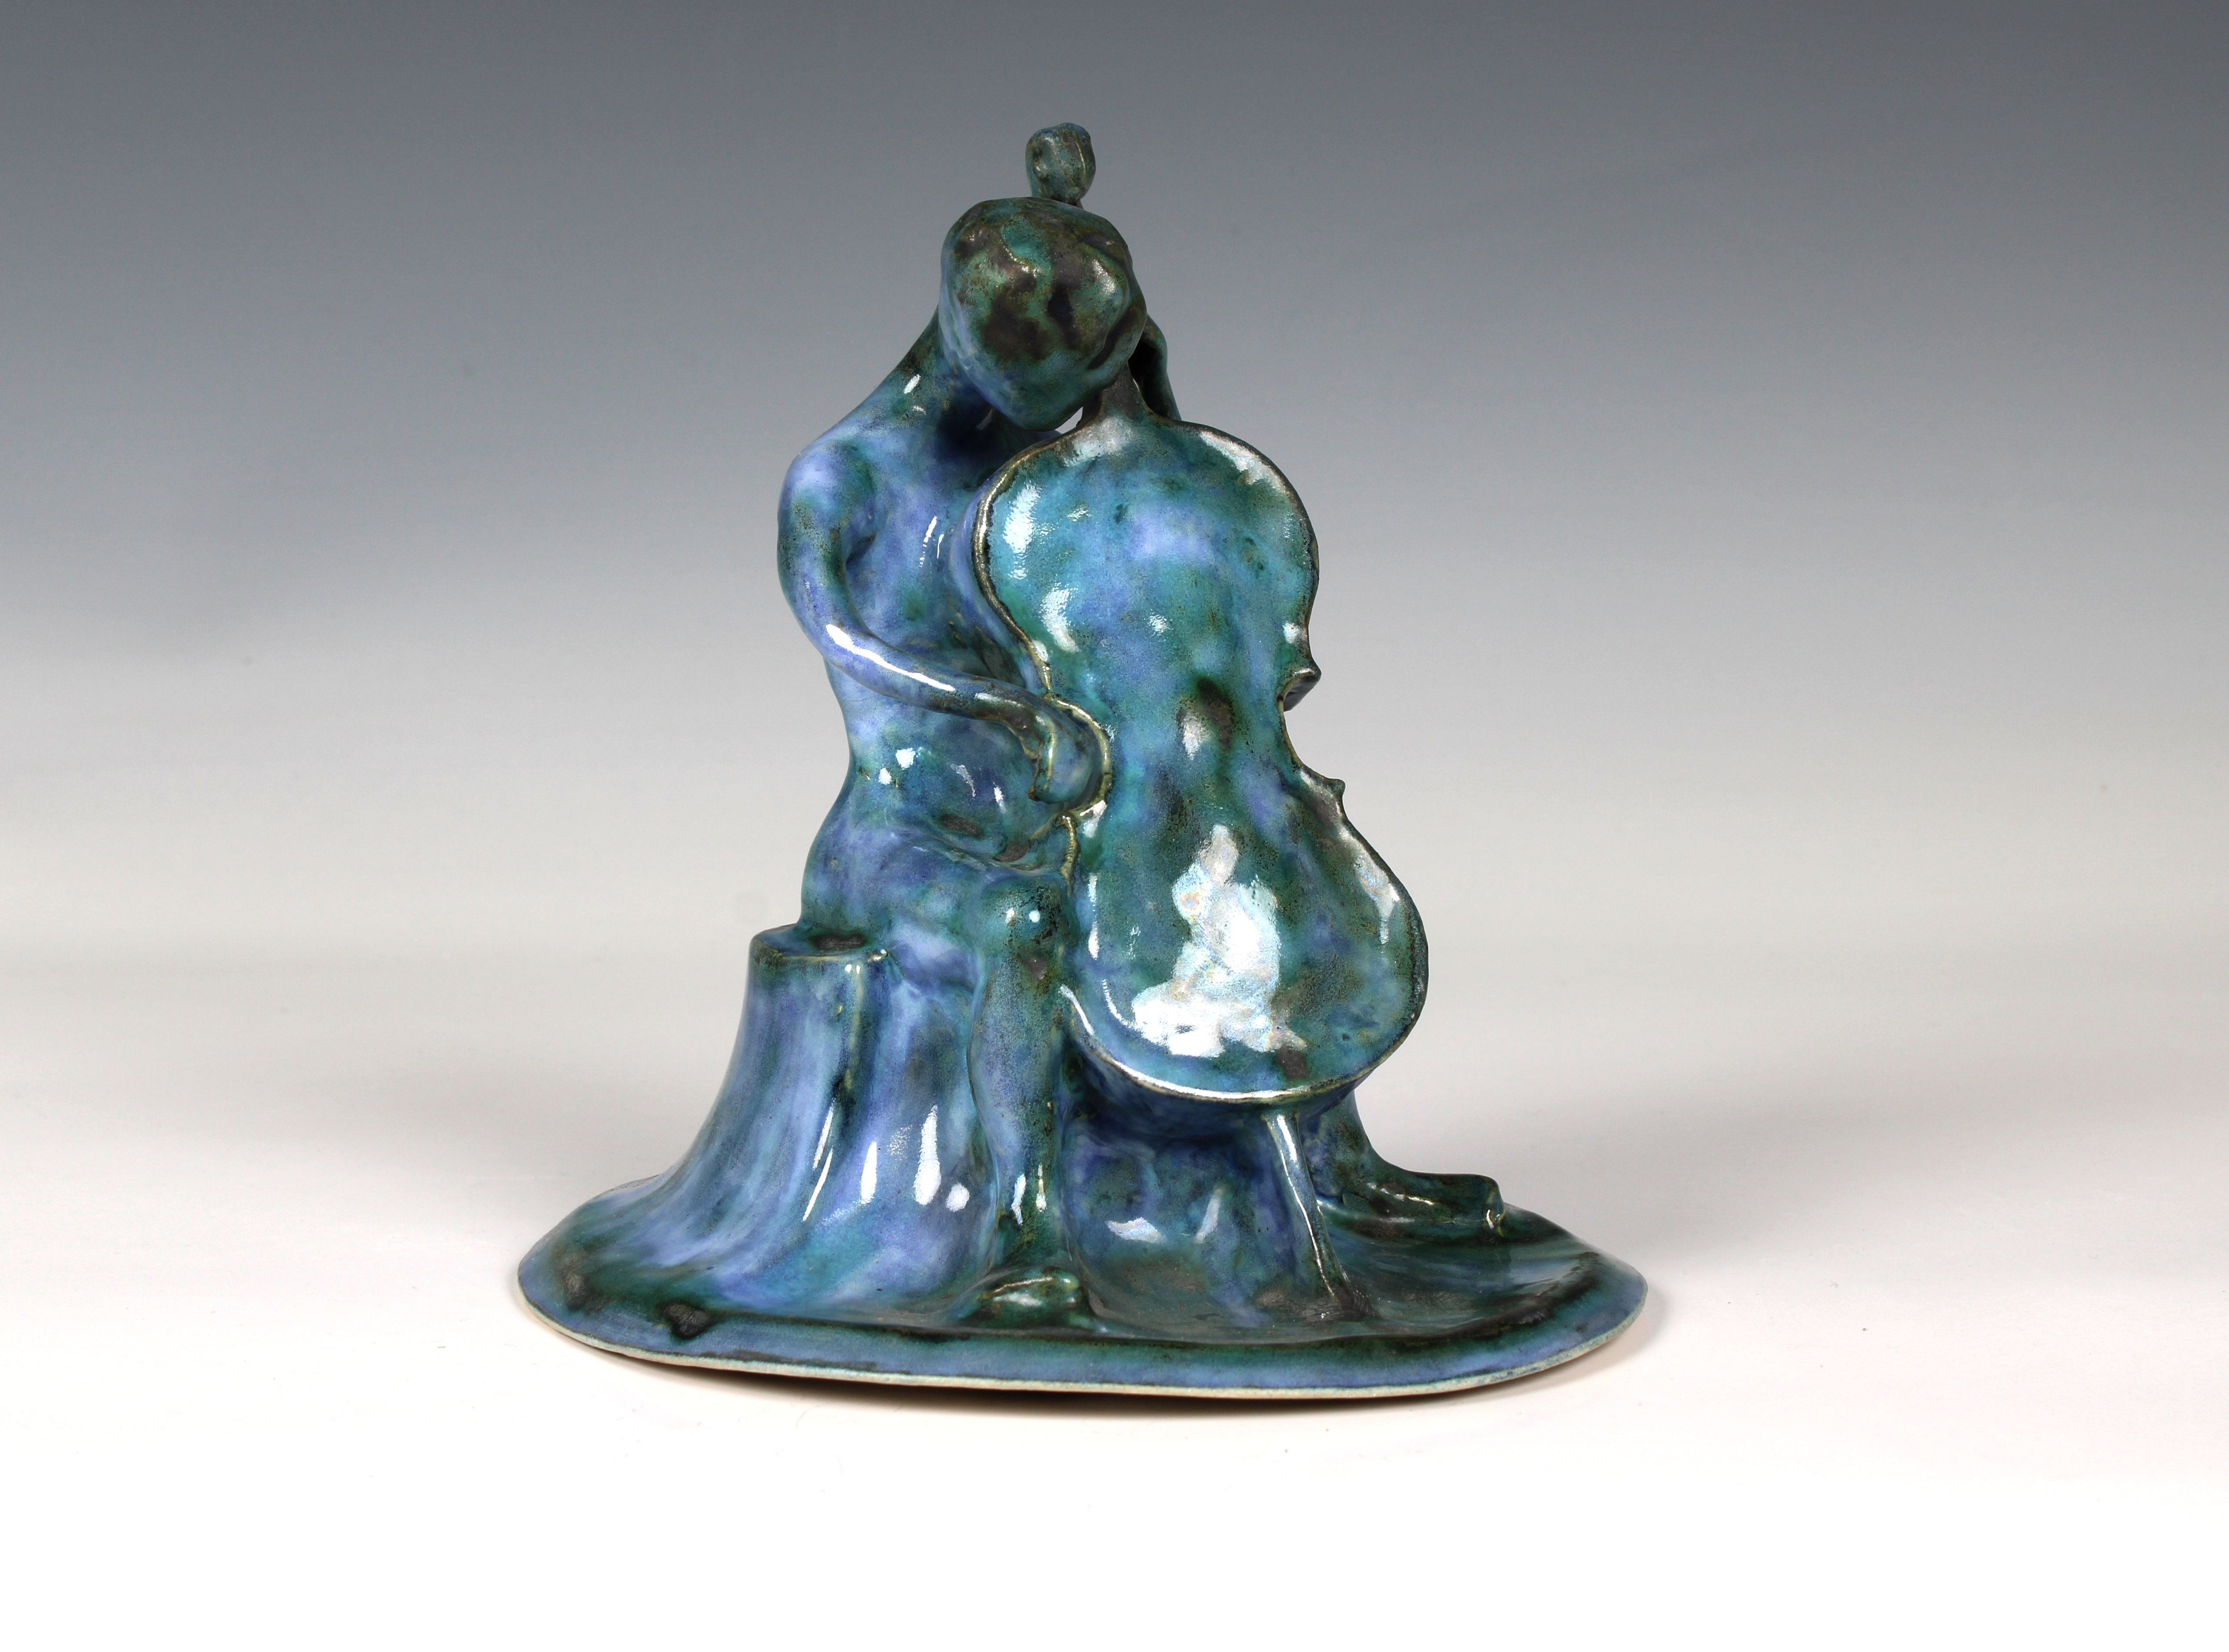 Elizabeth Ann Macphail (1939-89) A turquoise glazed stylised cellist or double bass player sculpture